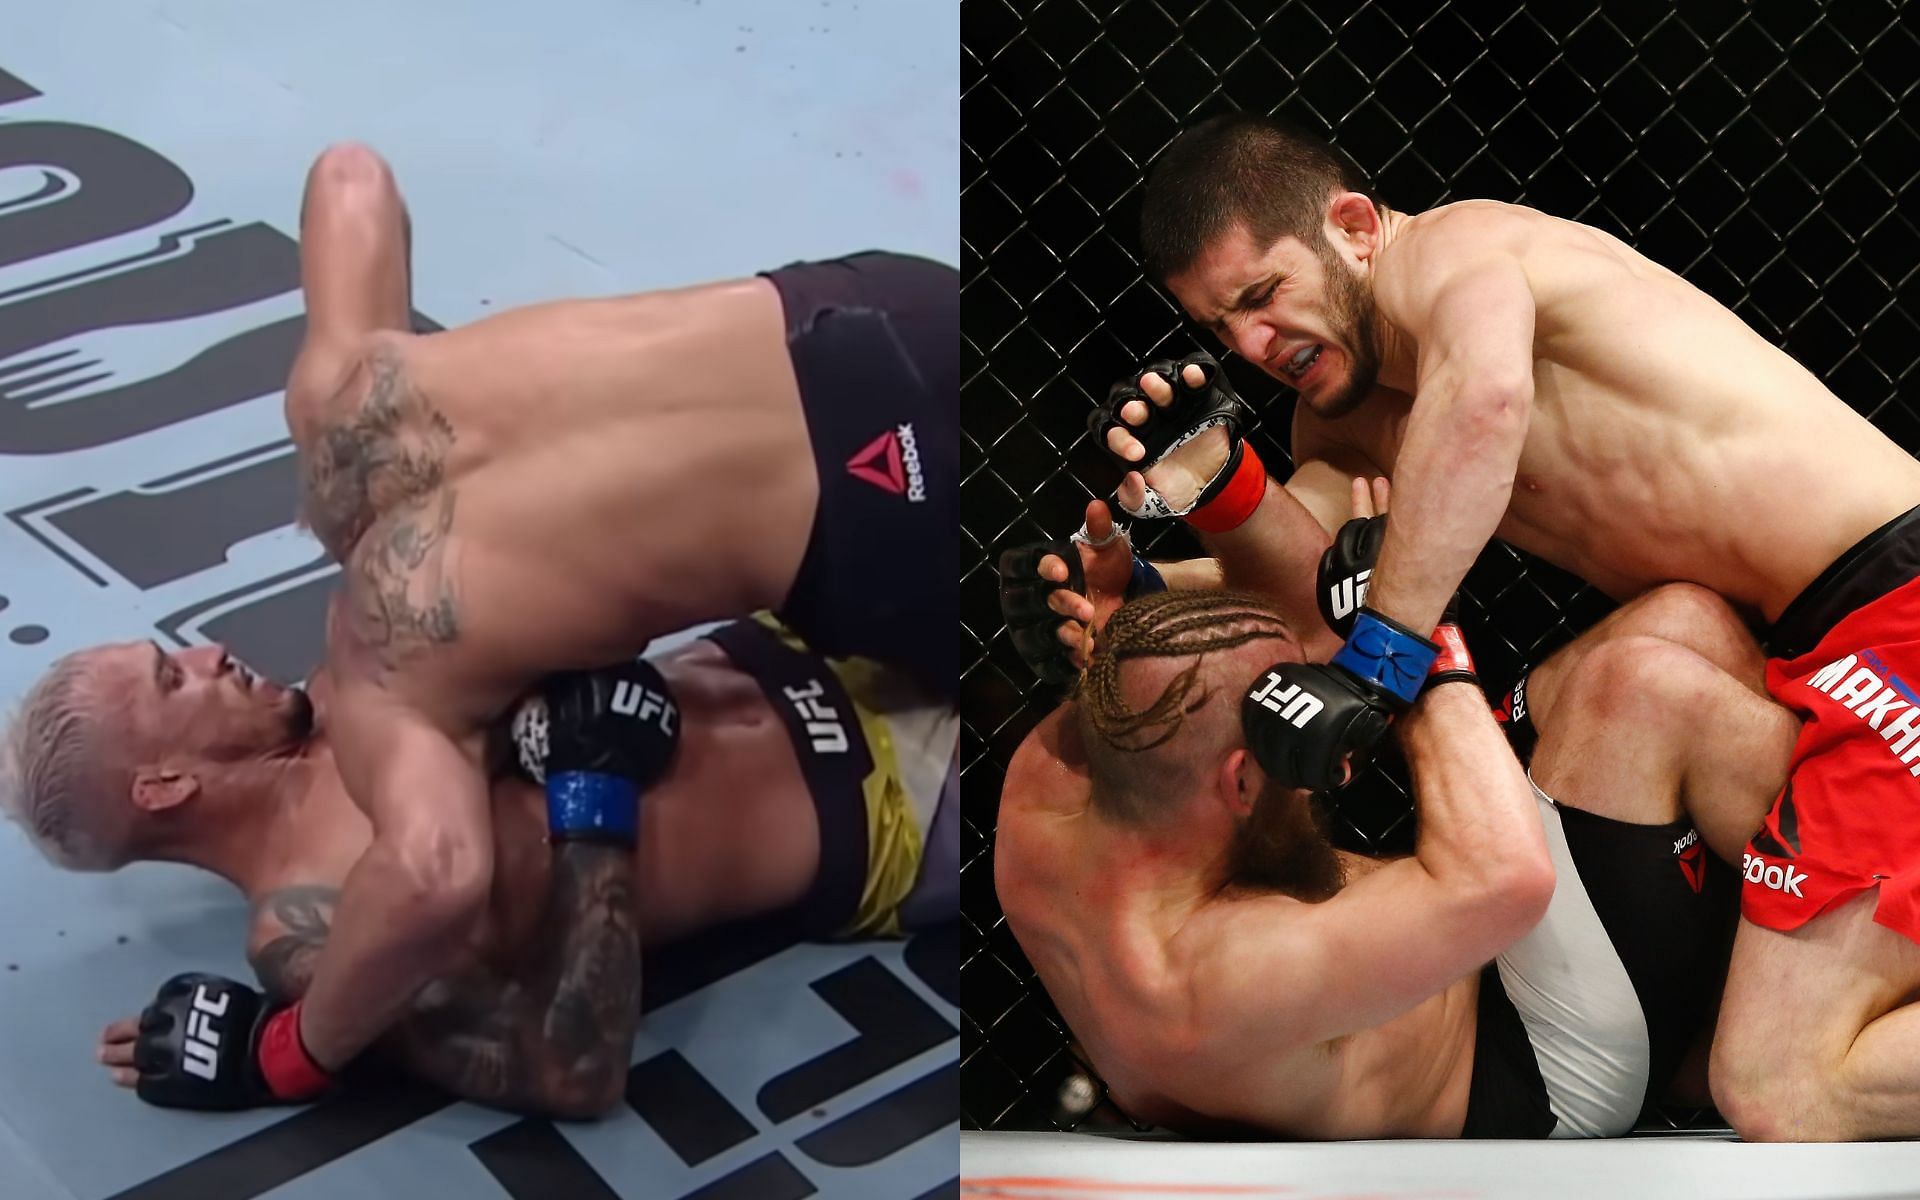 Charles Oliveira submitting Kevin Lee from the bottom position (Left), Islam Makhachev landing ground and pound on Nik Lentz from the top position (Right) [Image courtesy: UFC YouTube channel and Getty Images]